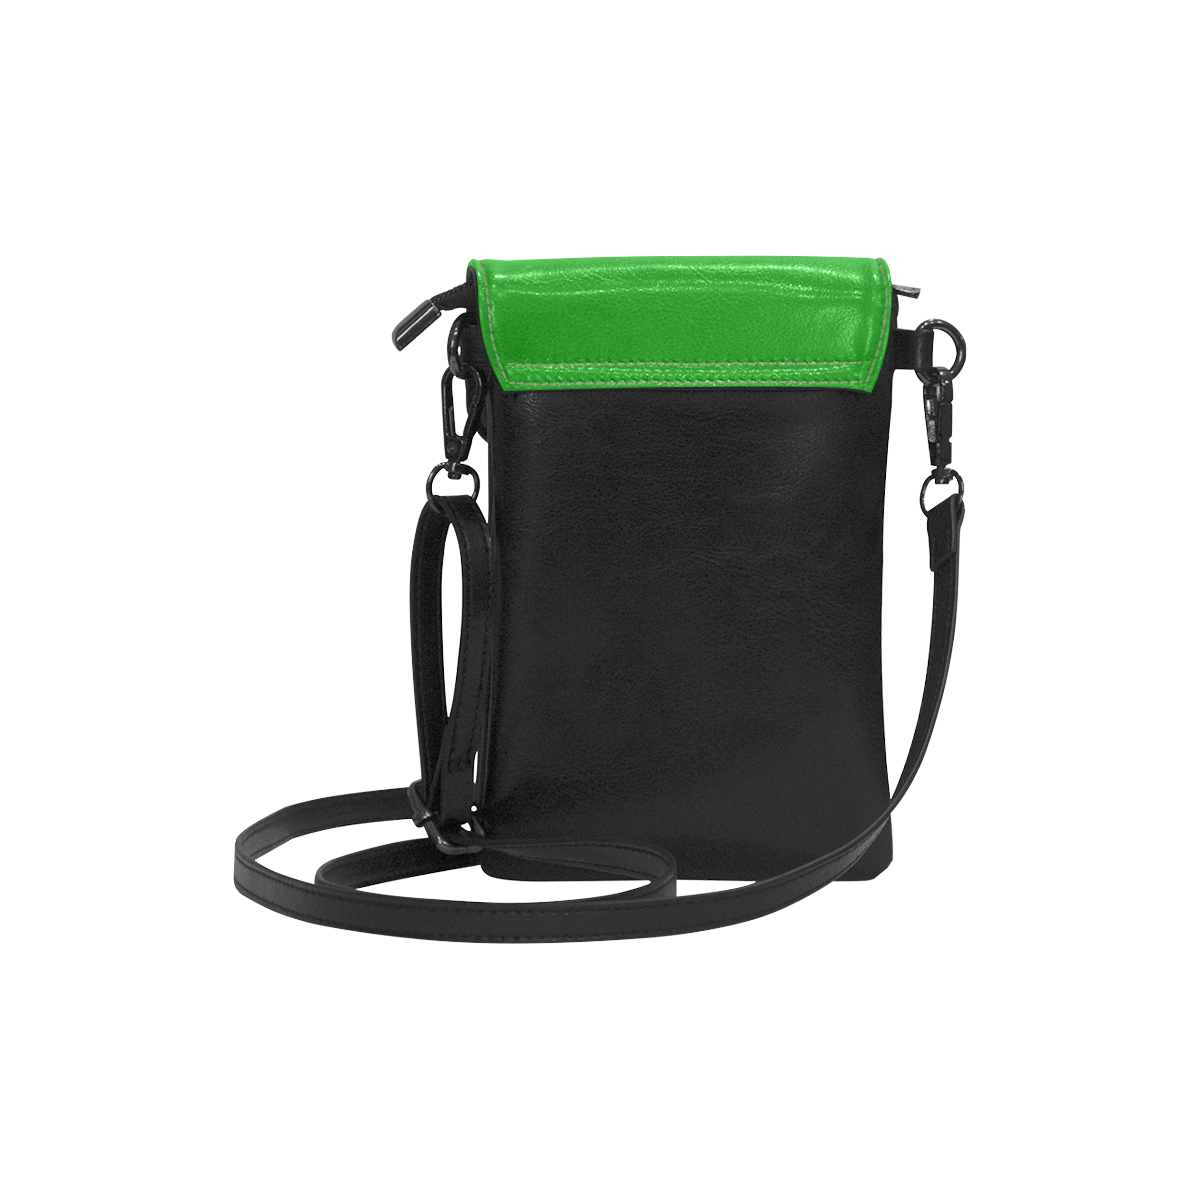 color green Small Cell Phone Purse (Model 1711)